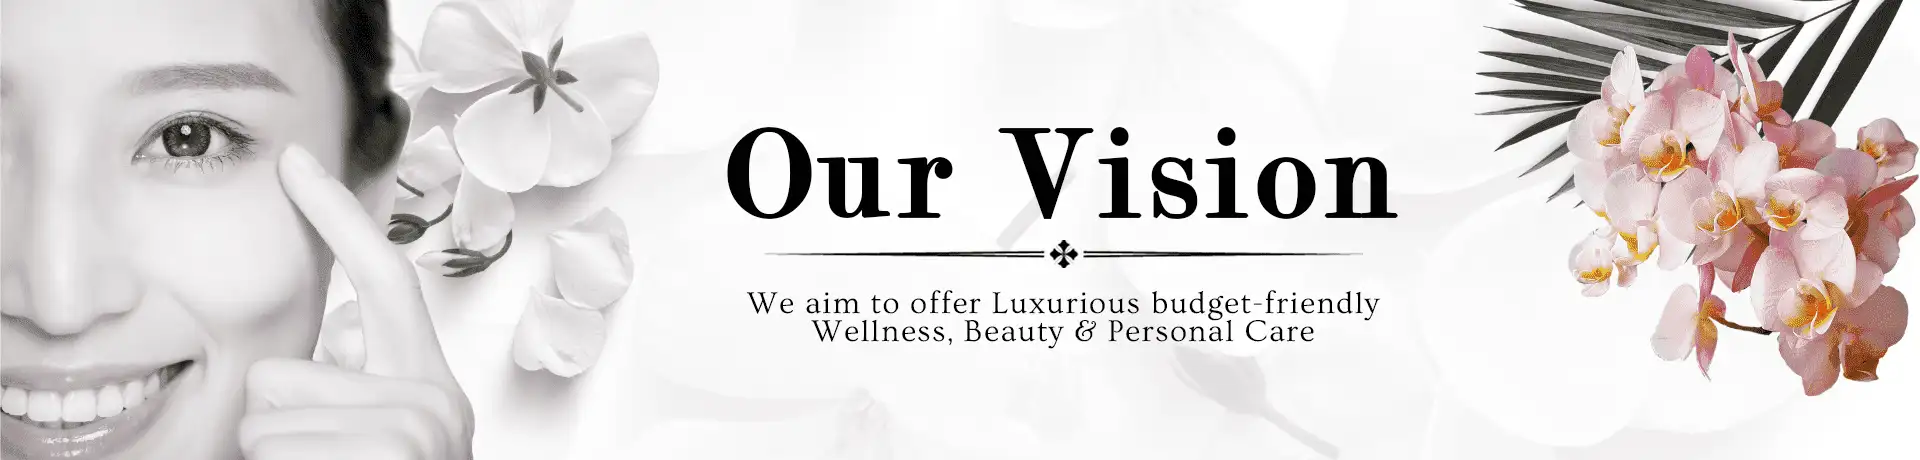 Our-Vision